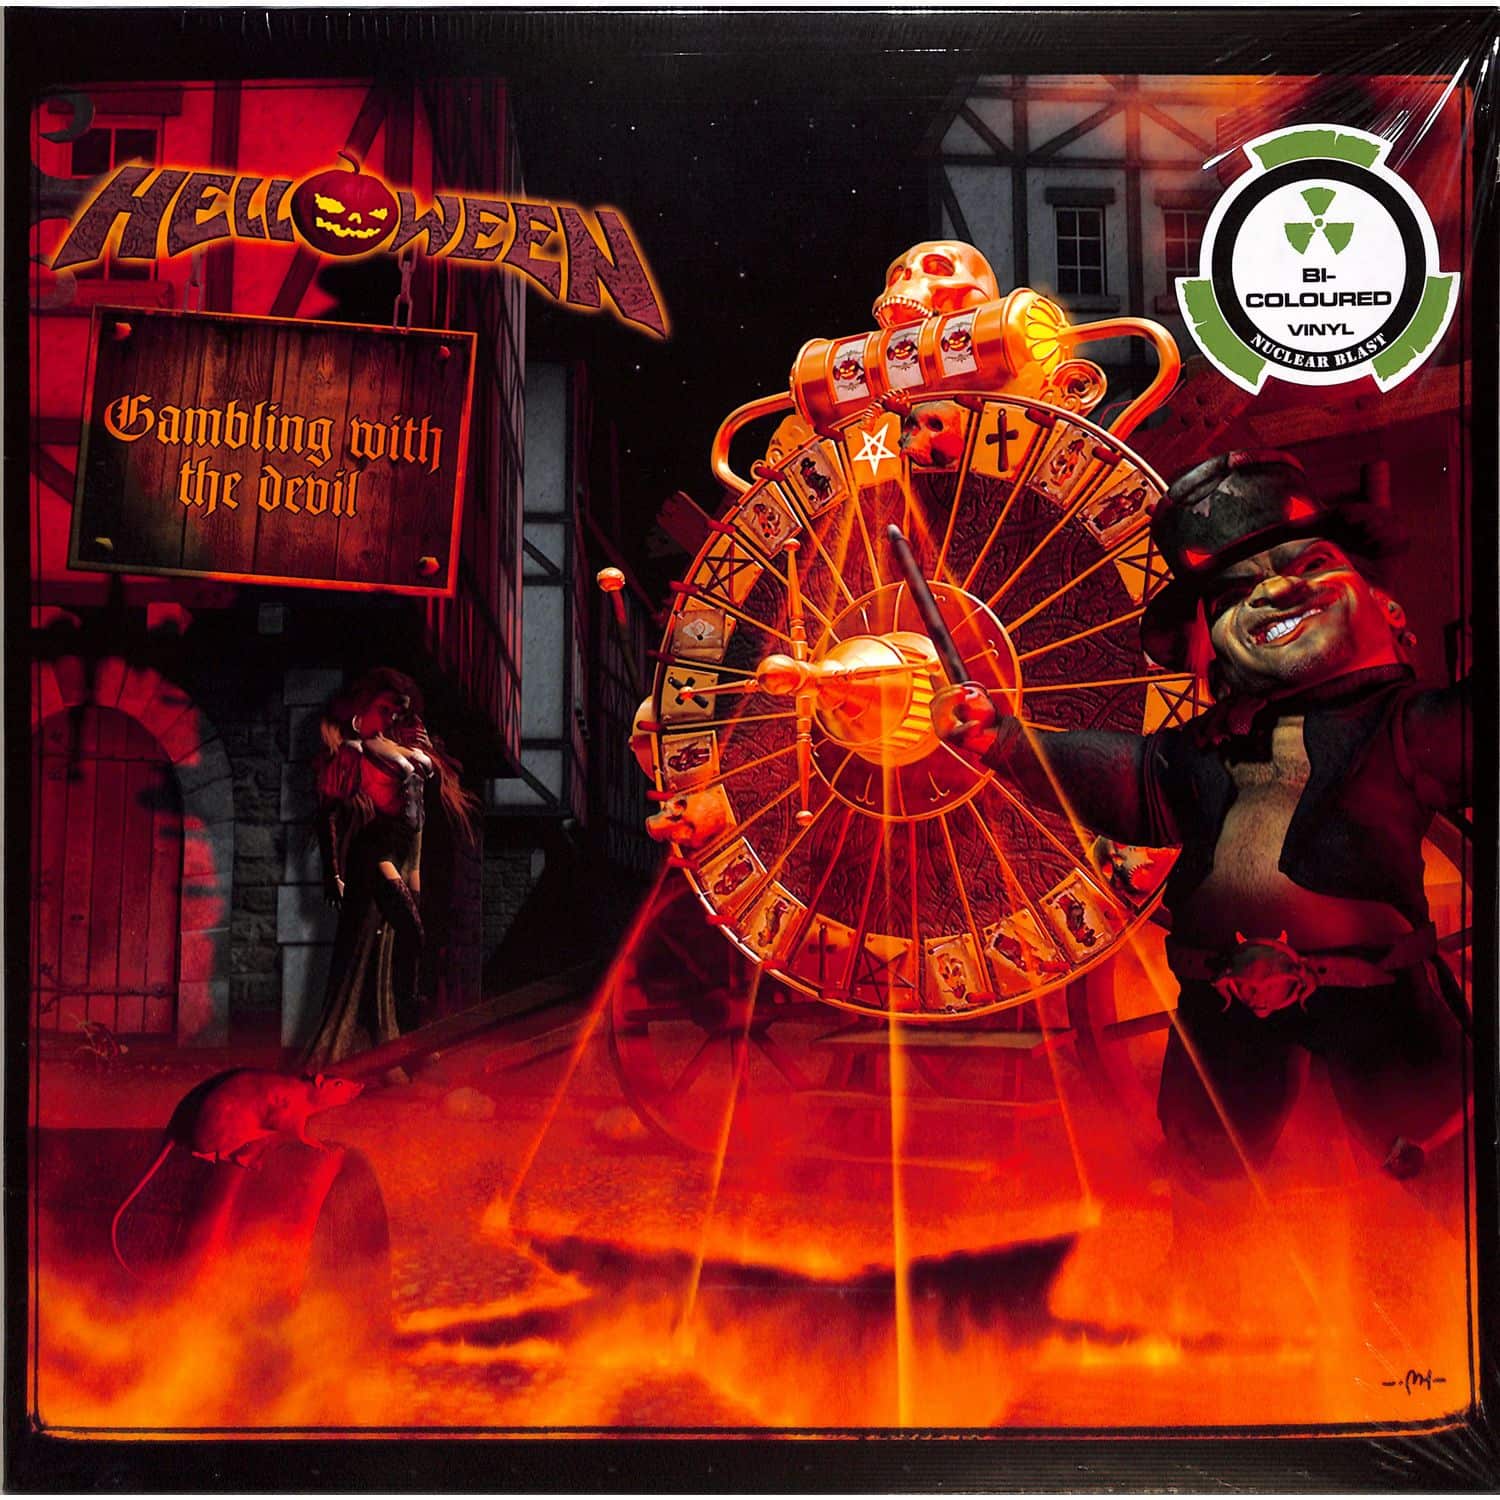 Helloween - GAMBLING WITH THE DEVIL 